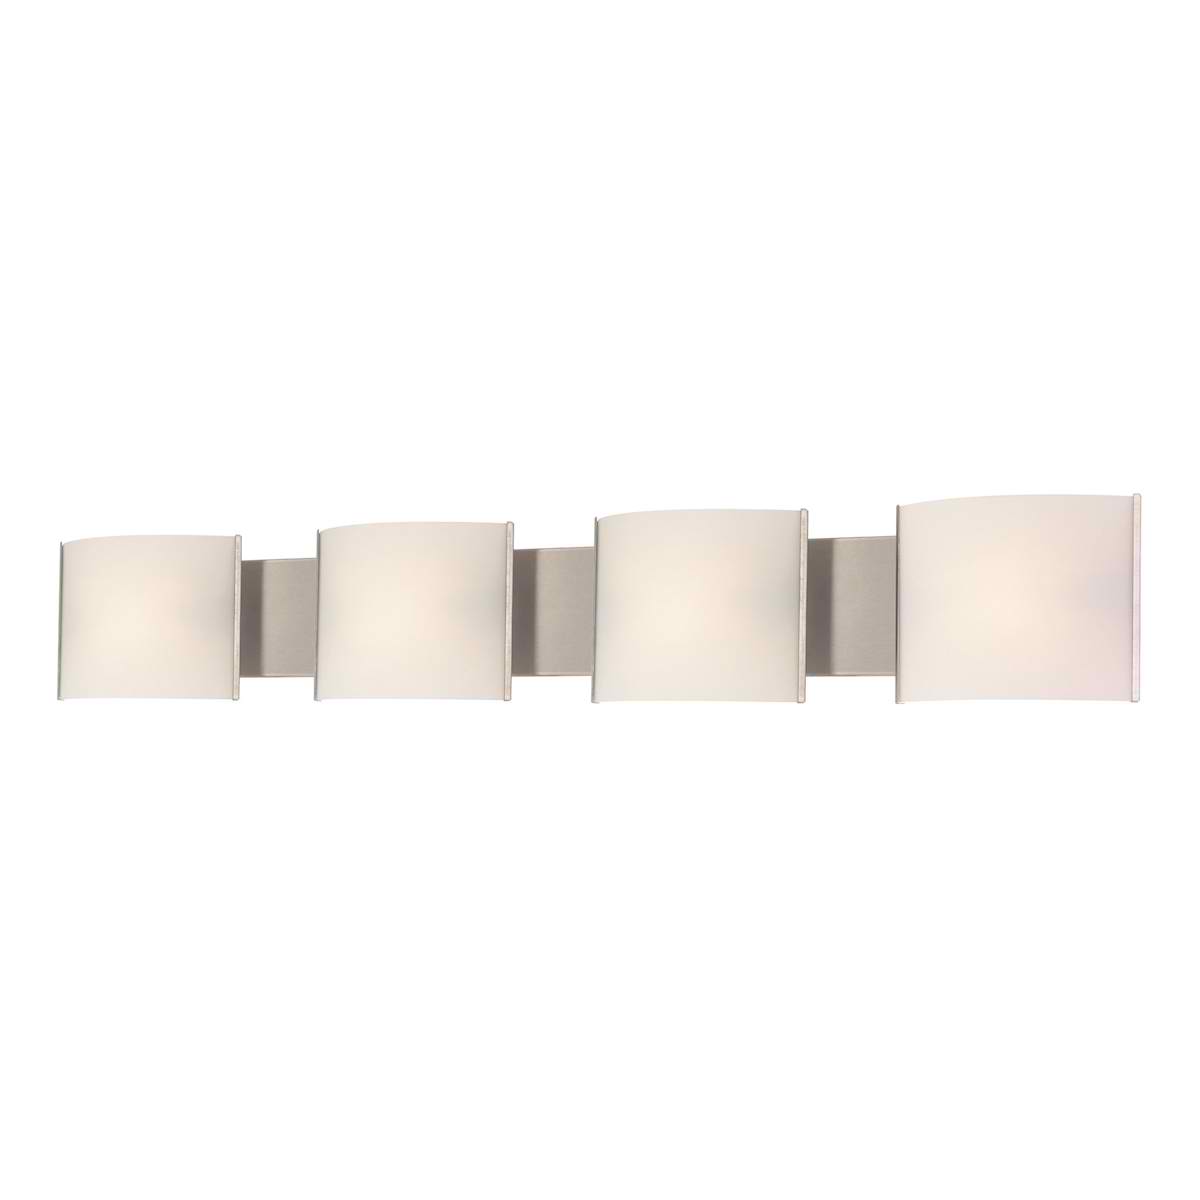 Pannelli Vanity - 4 Light with Lamps. White Opal Glass / SS Finish